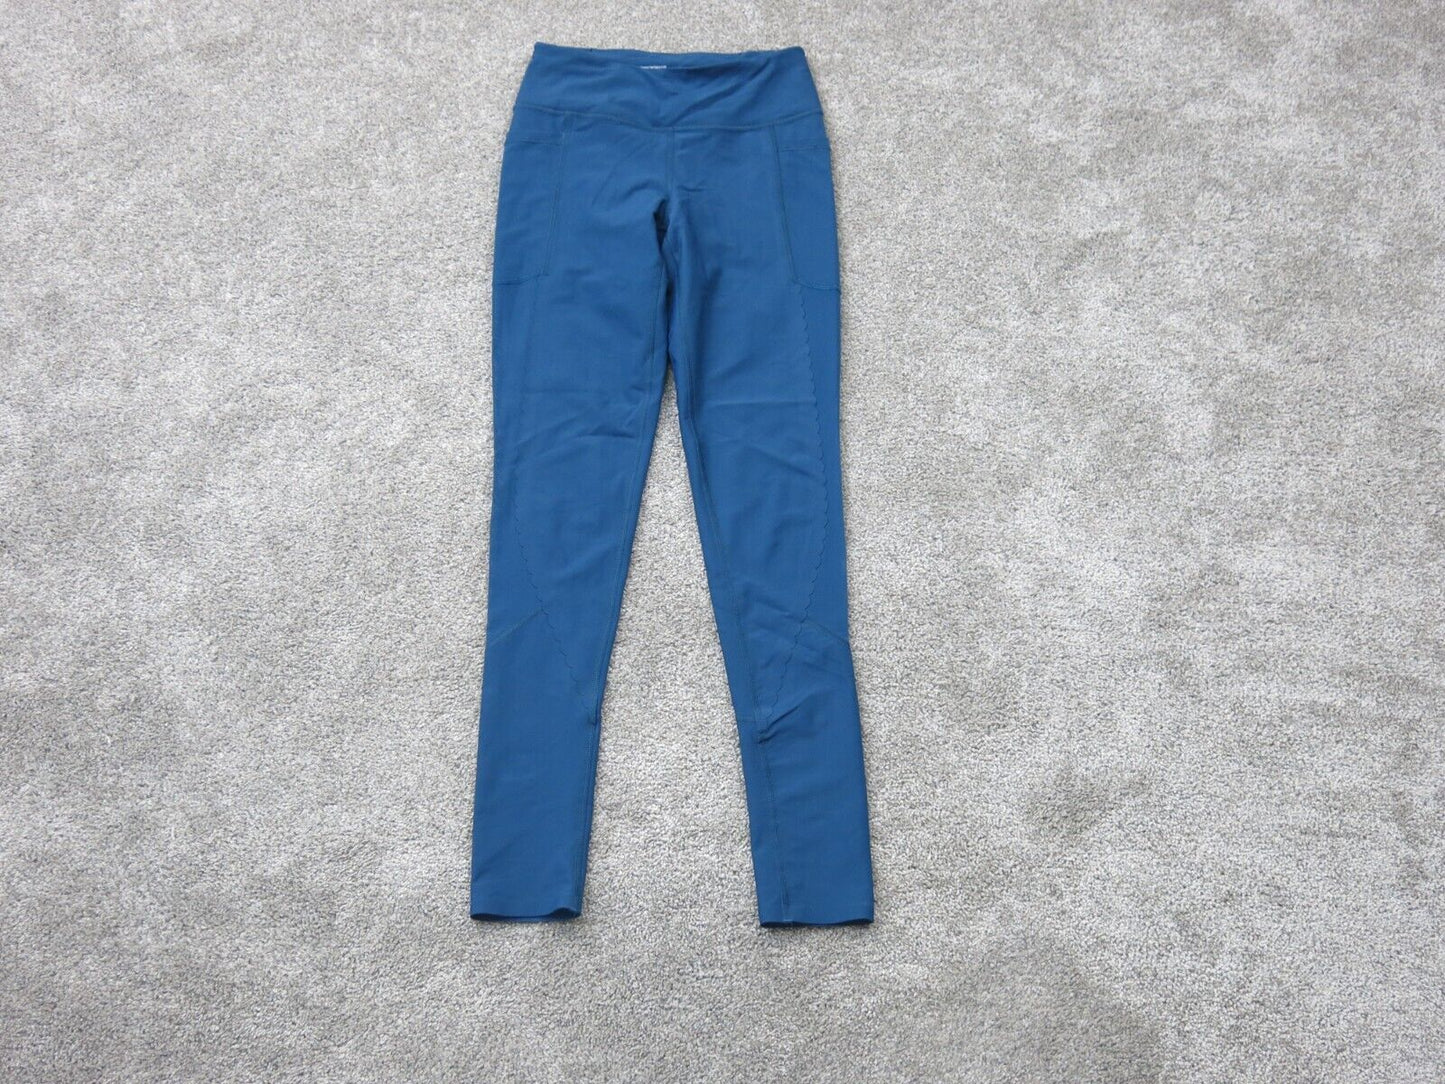 Victoria Sport Womens Knockout Tights Pants Stretchable High Waist Blue Size XS